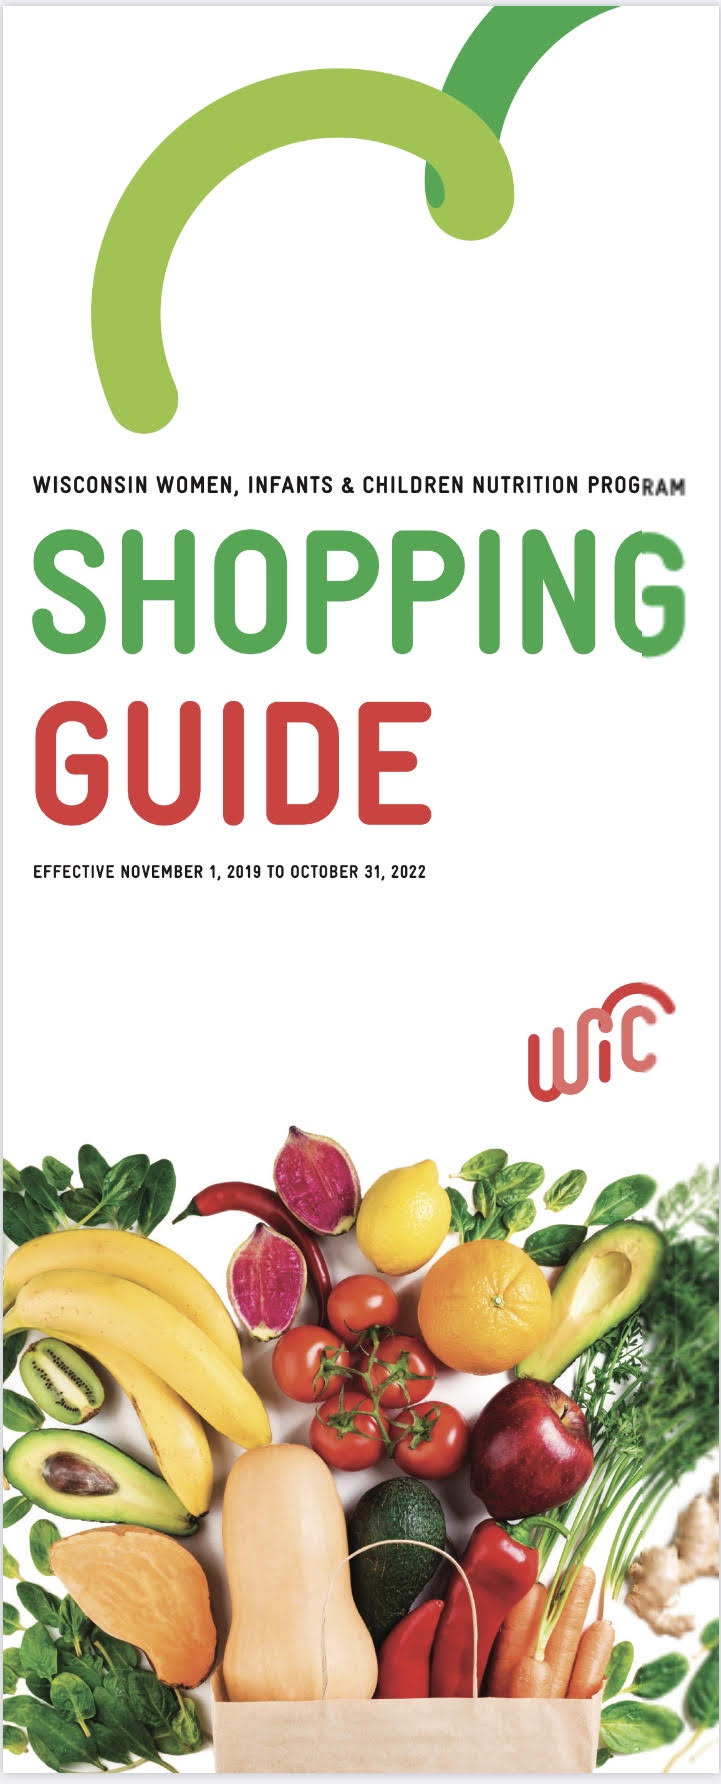 Shopping With Your eWIC Card